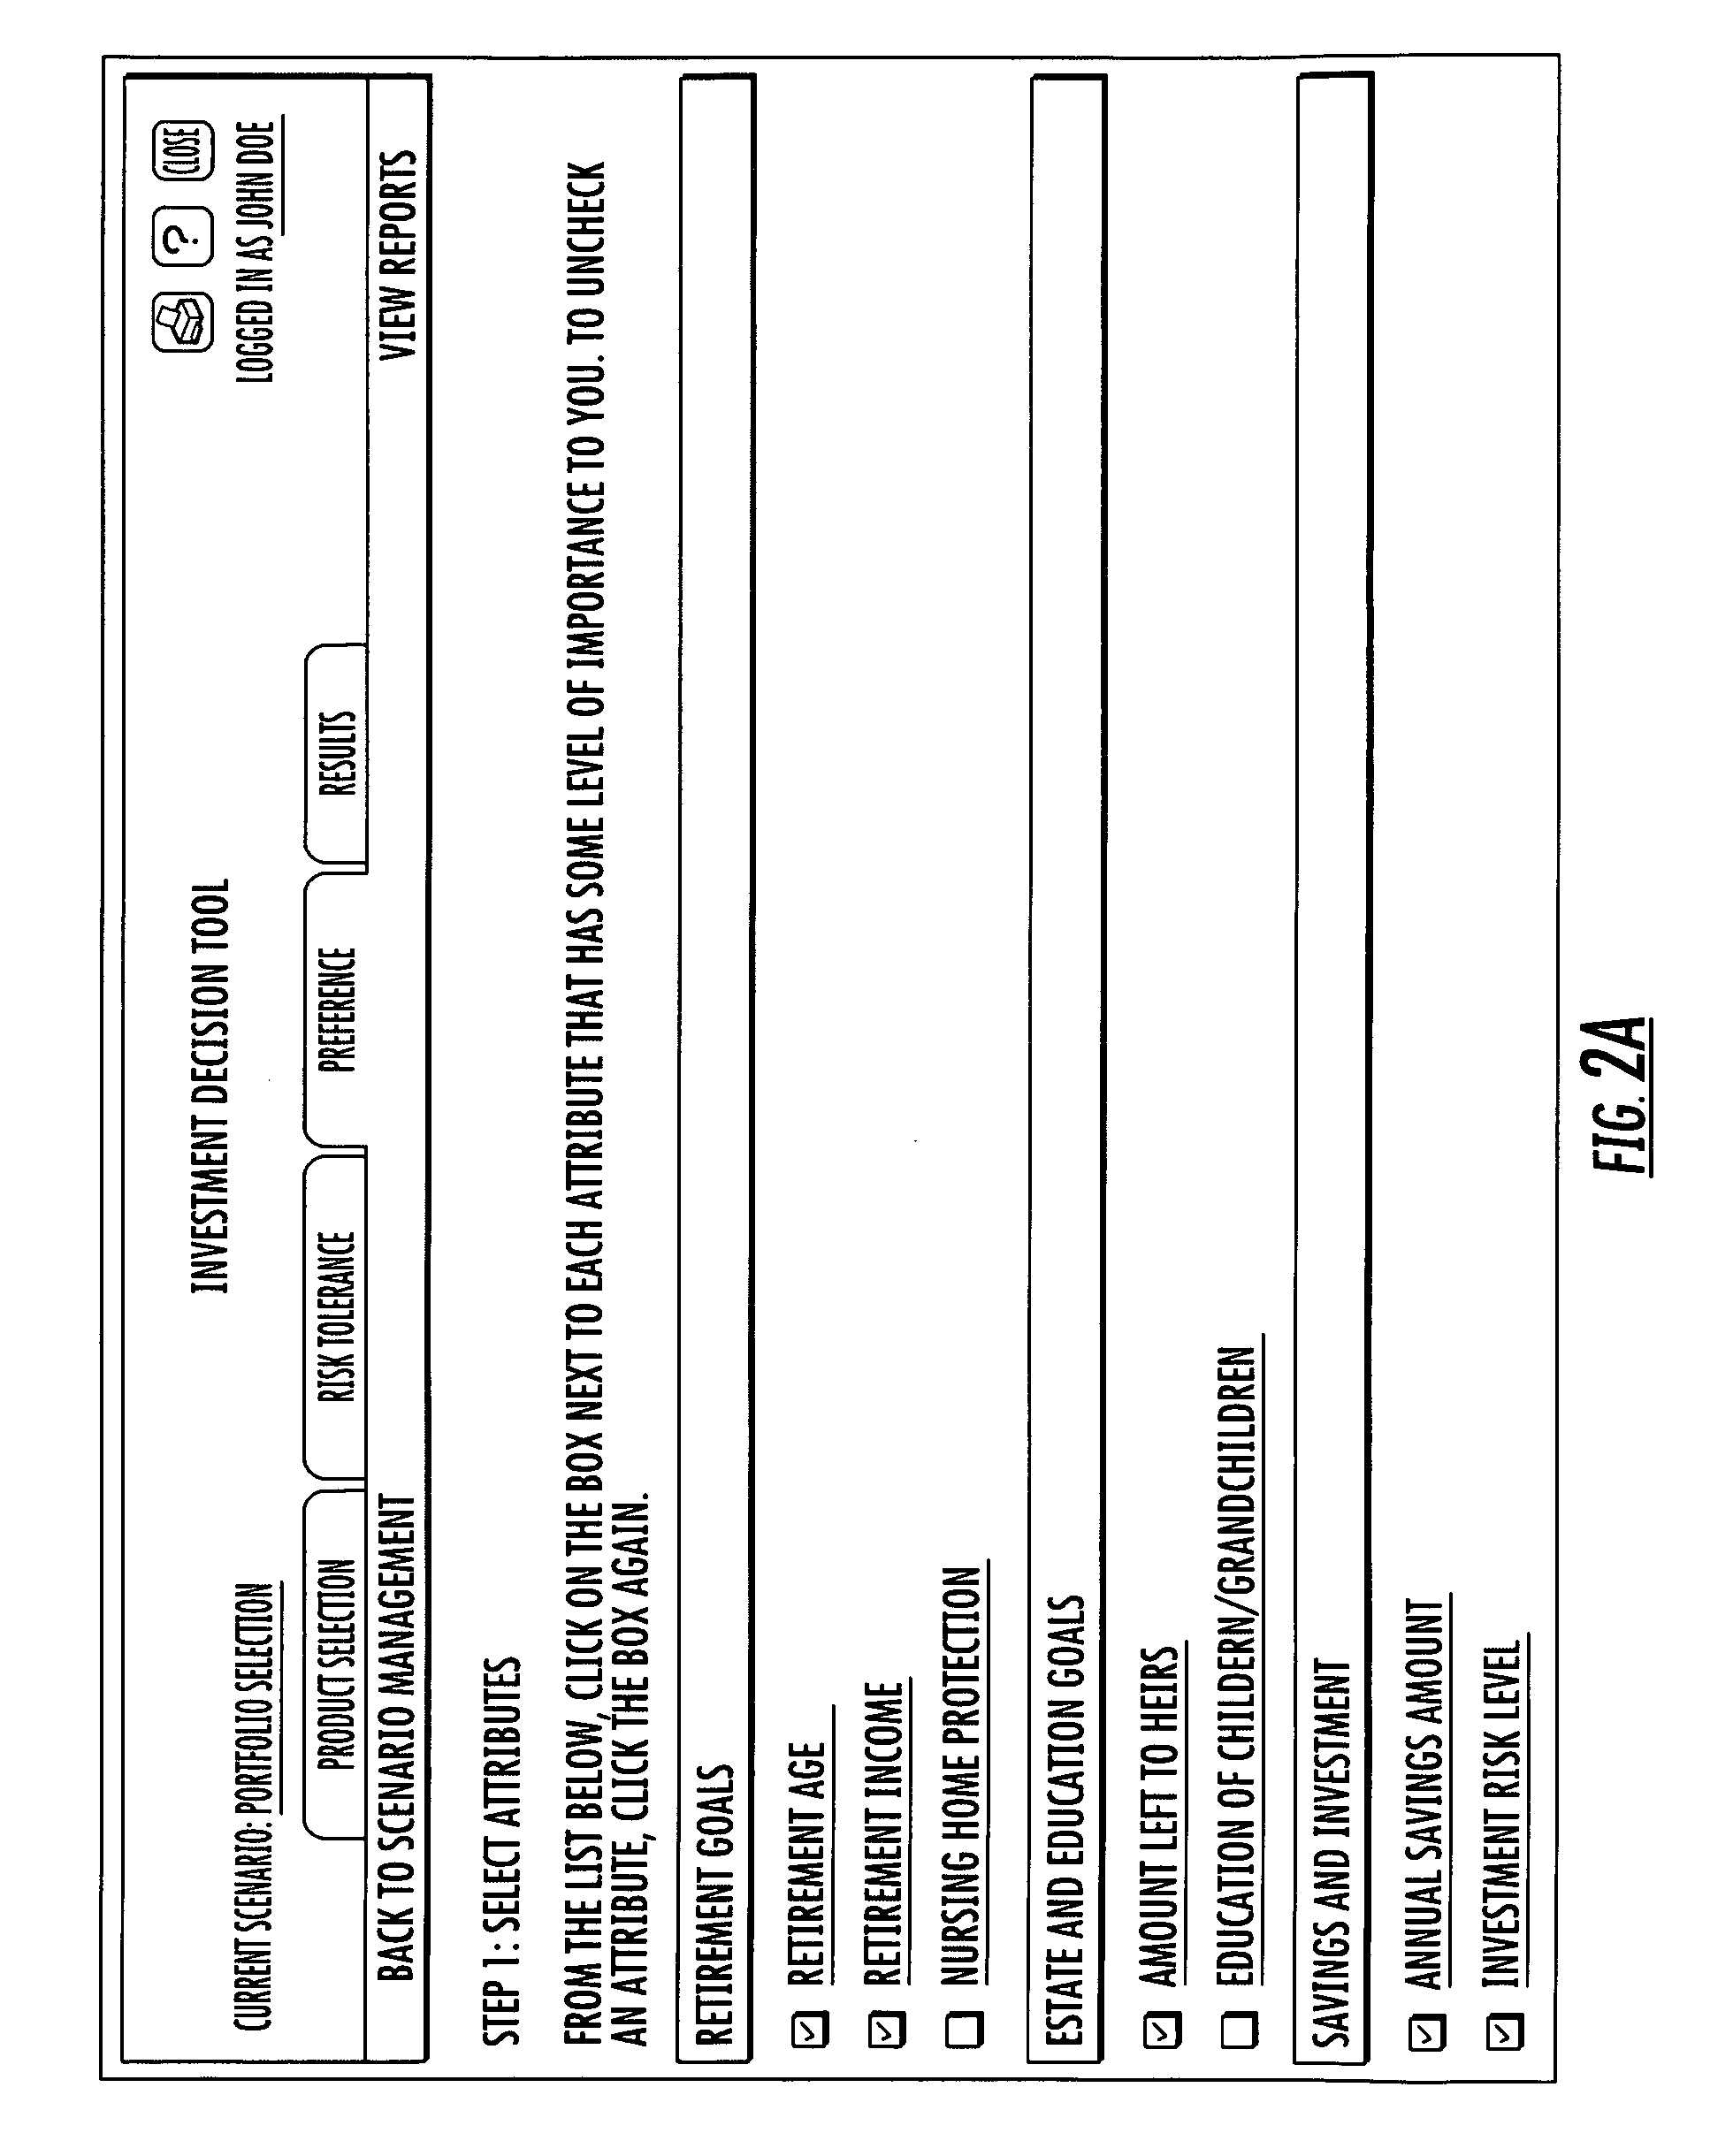 Method and system for using risk tolerance and life goal preferences and rankings to enhance financial projections